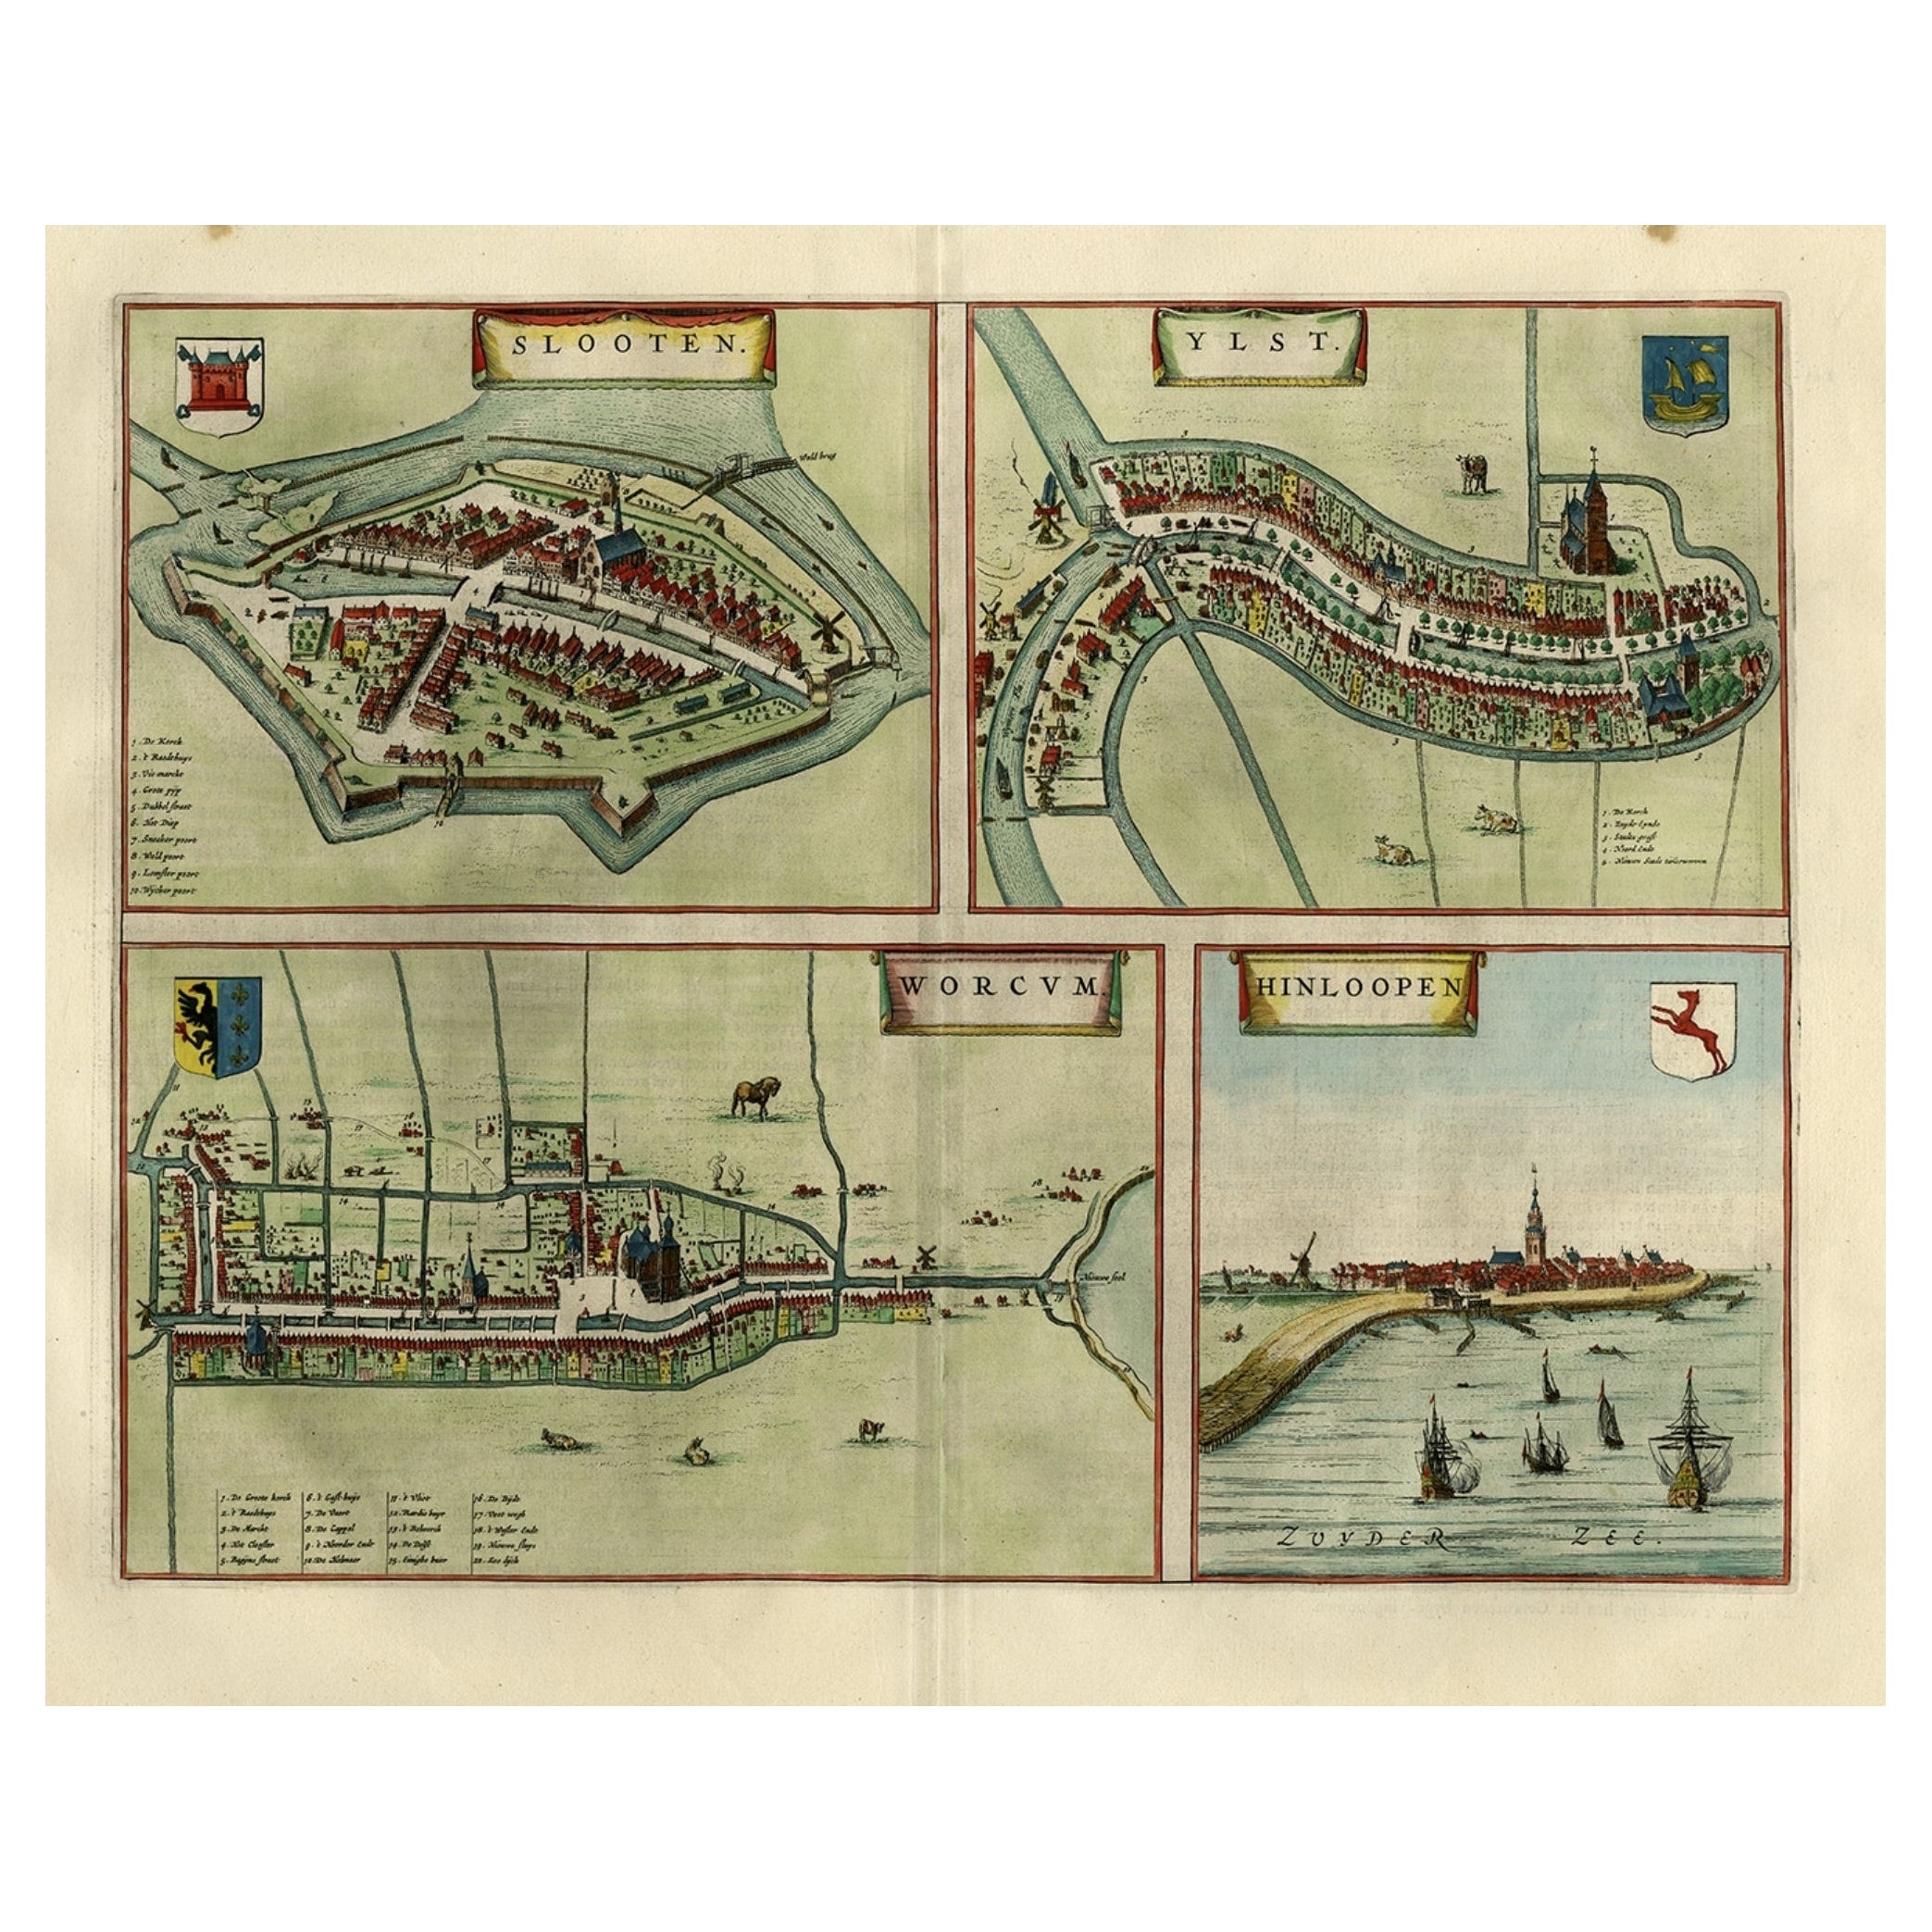 Antique Map of Frisian Cities Sloten, Ylst, Workum and Hindelopen by Blaeu, 1652 For Sale